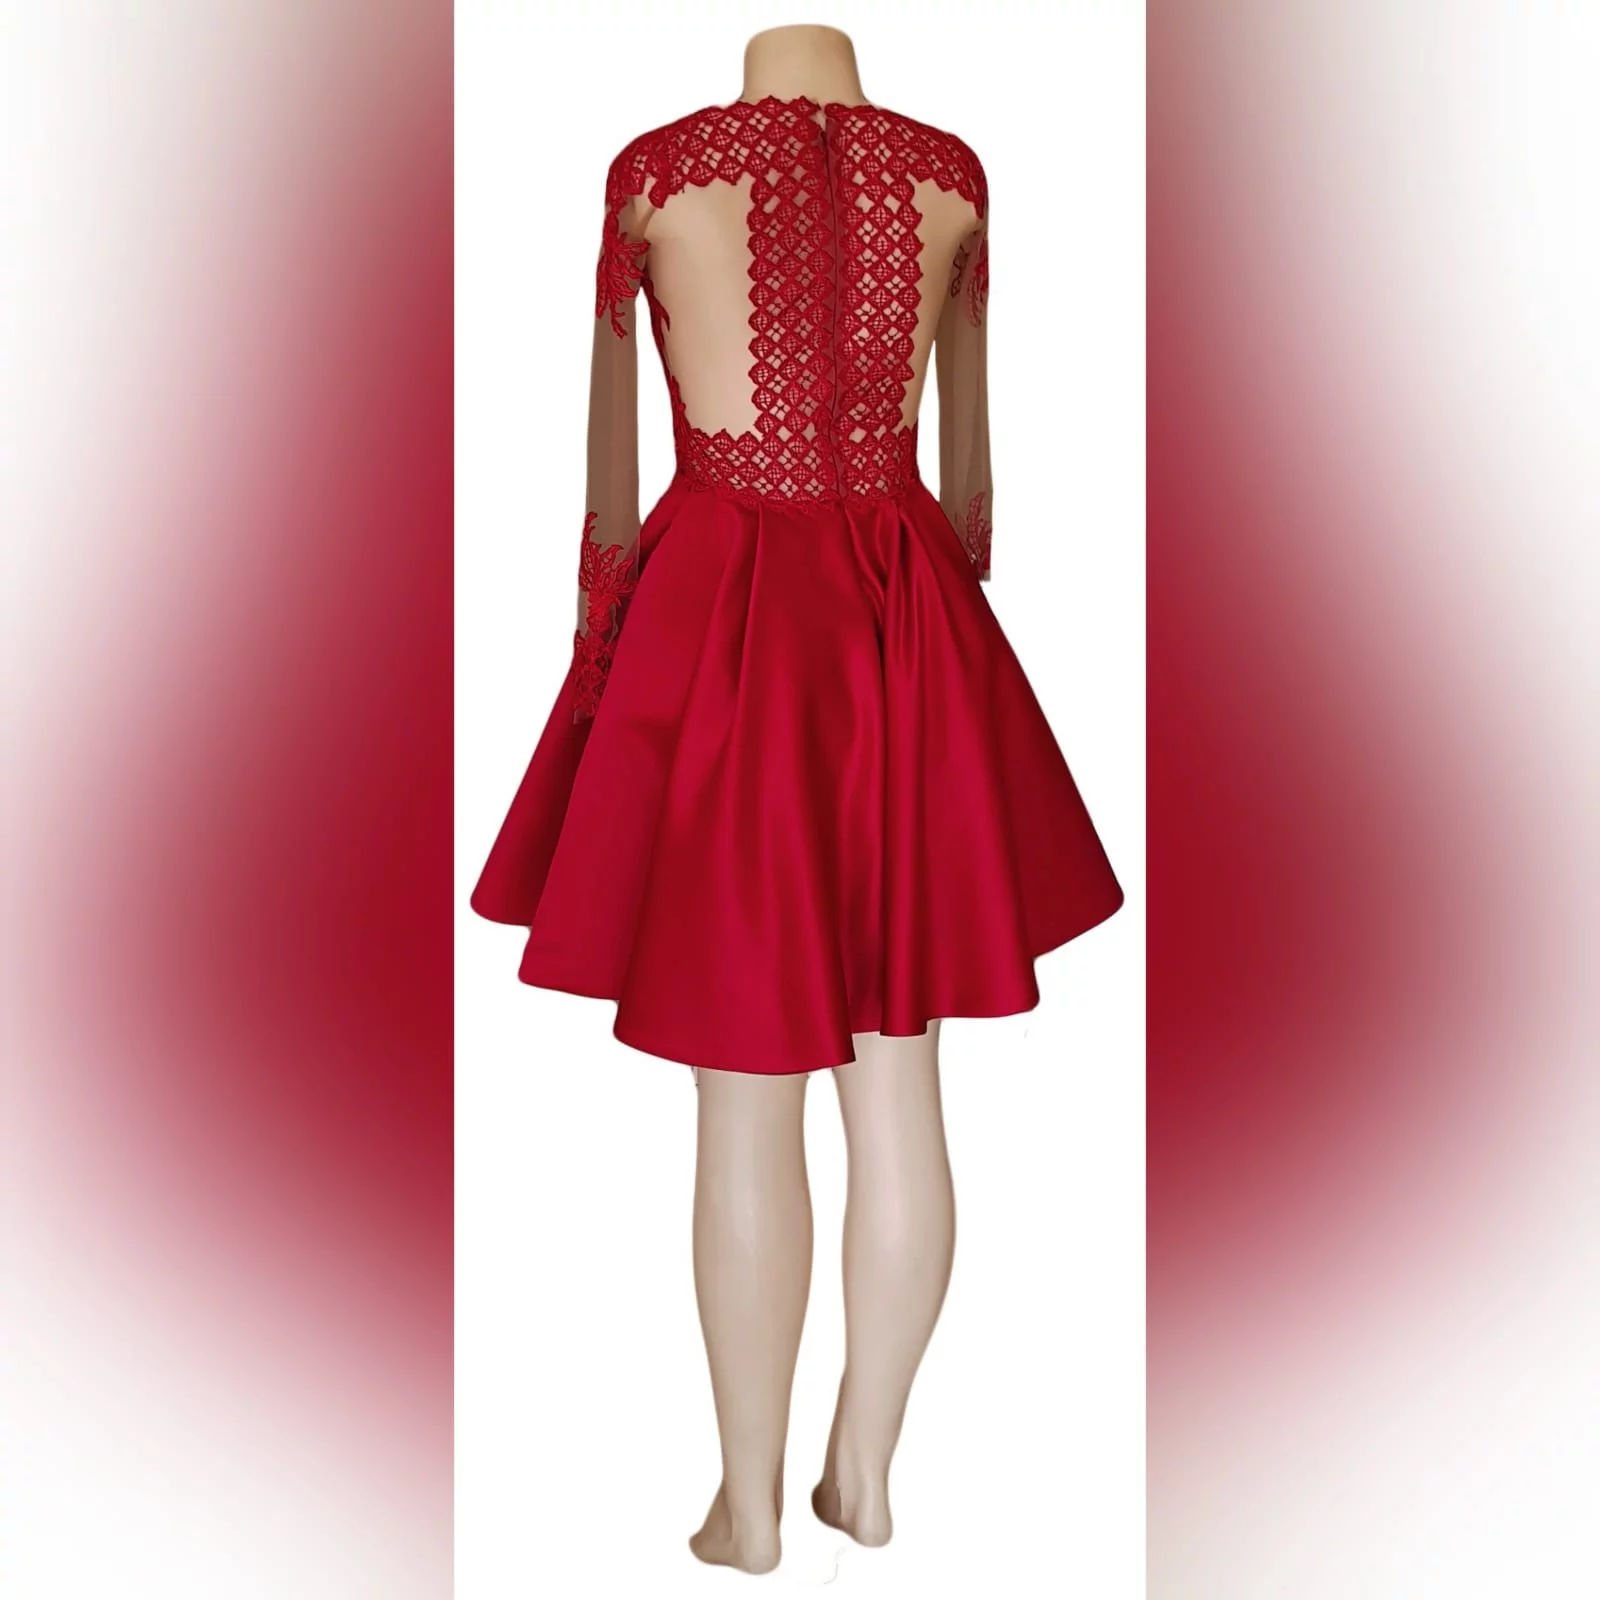 Red short satin prom dress 9 red short satin prom dress with an illusion neckline detailed with lace, long illusion lace sleeves. Illusion back detailed with lace.